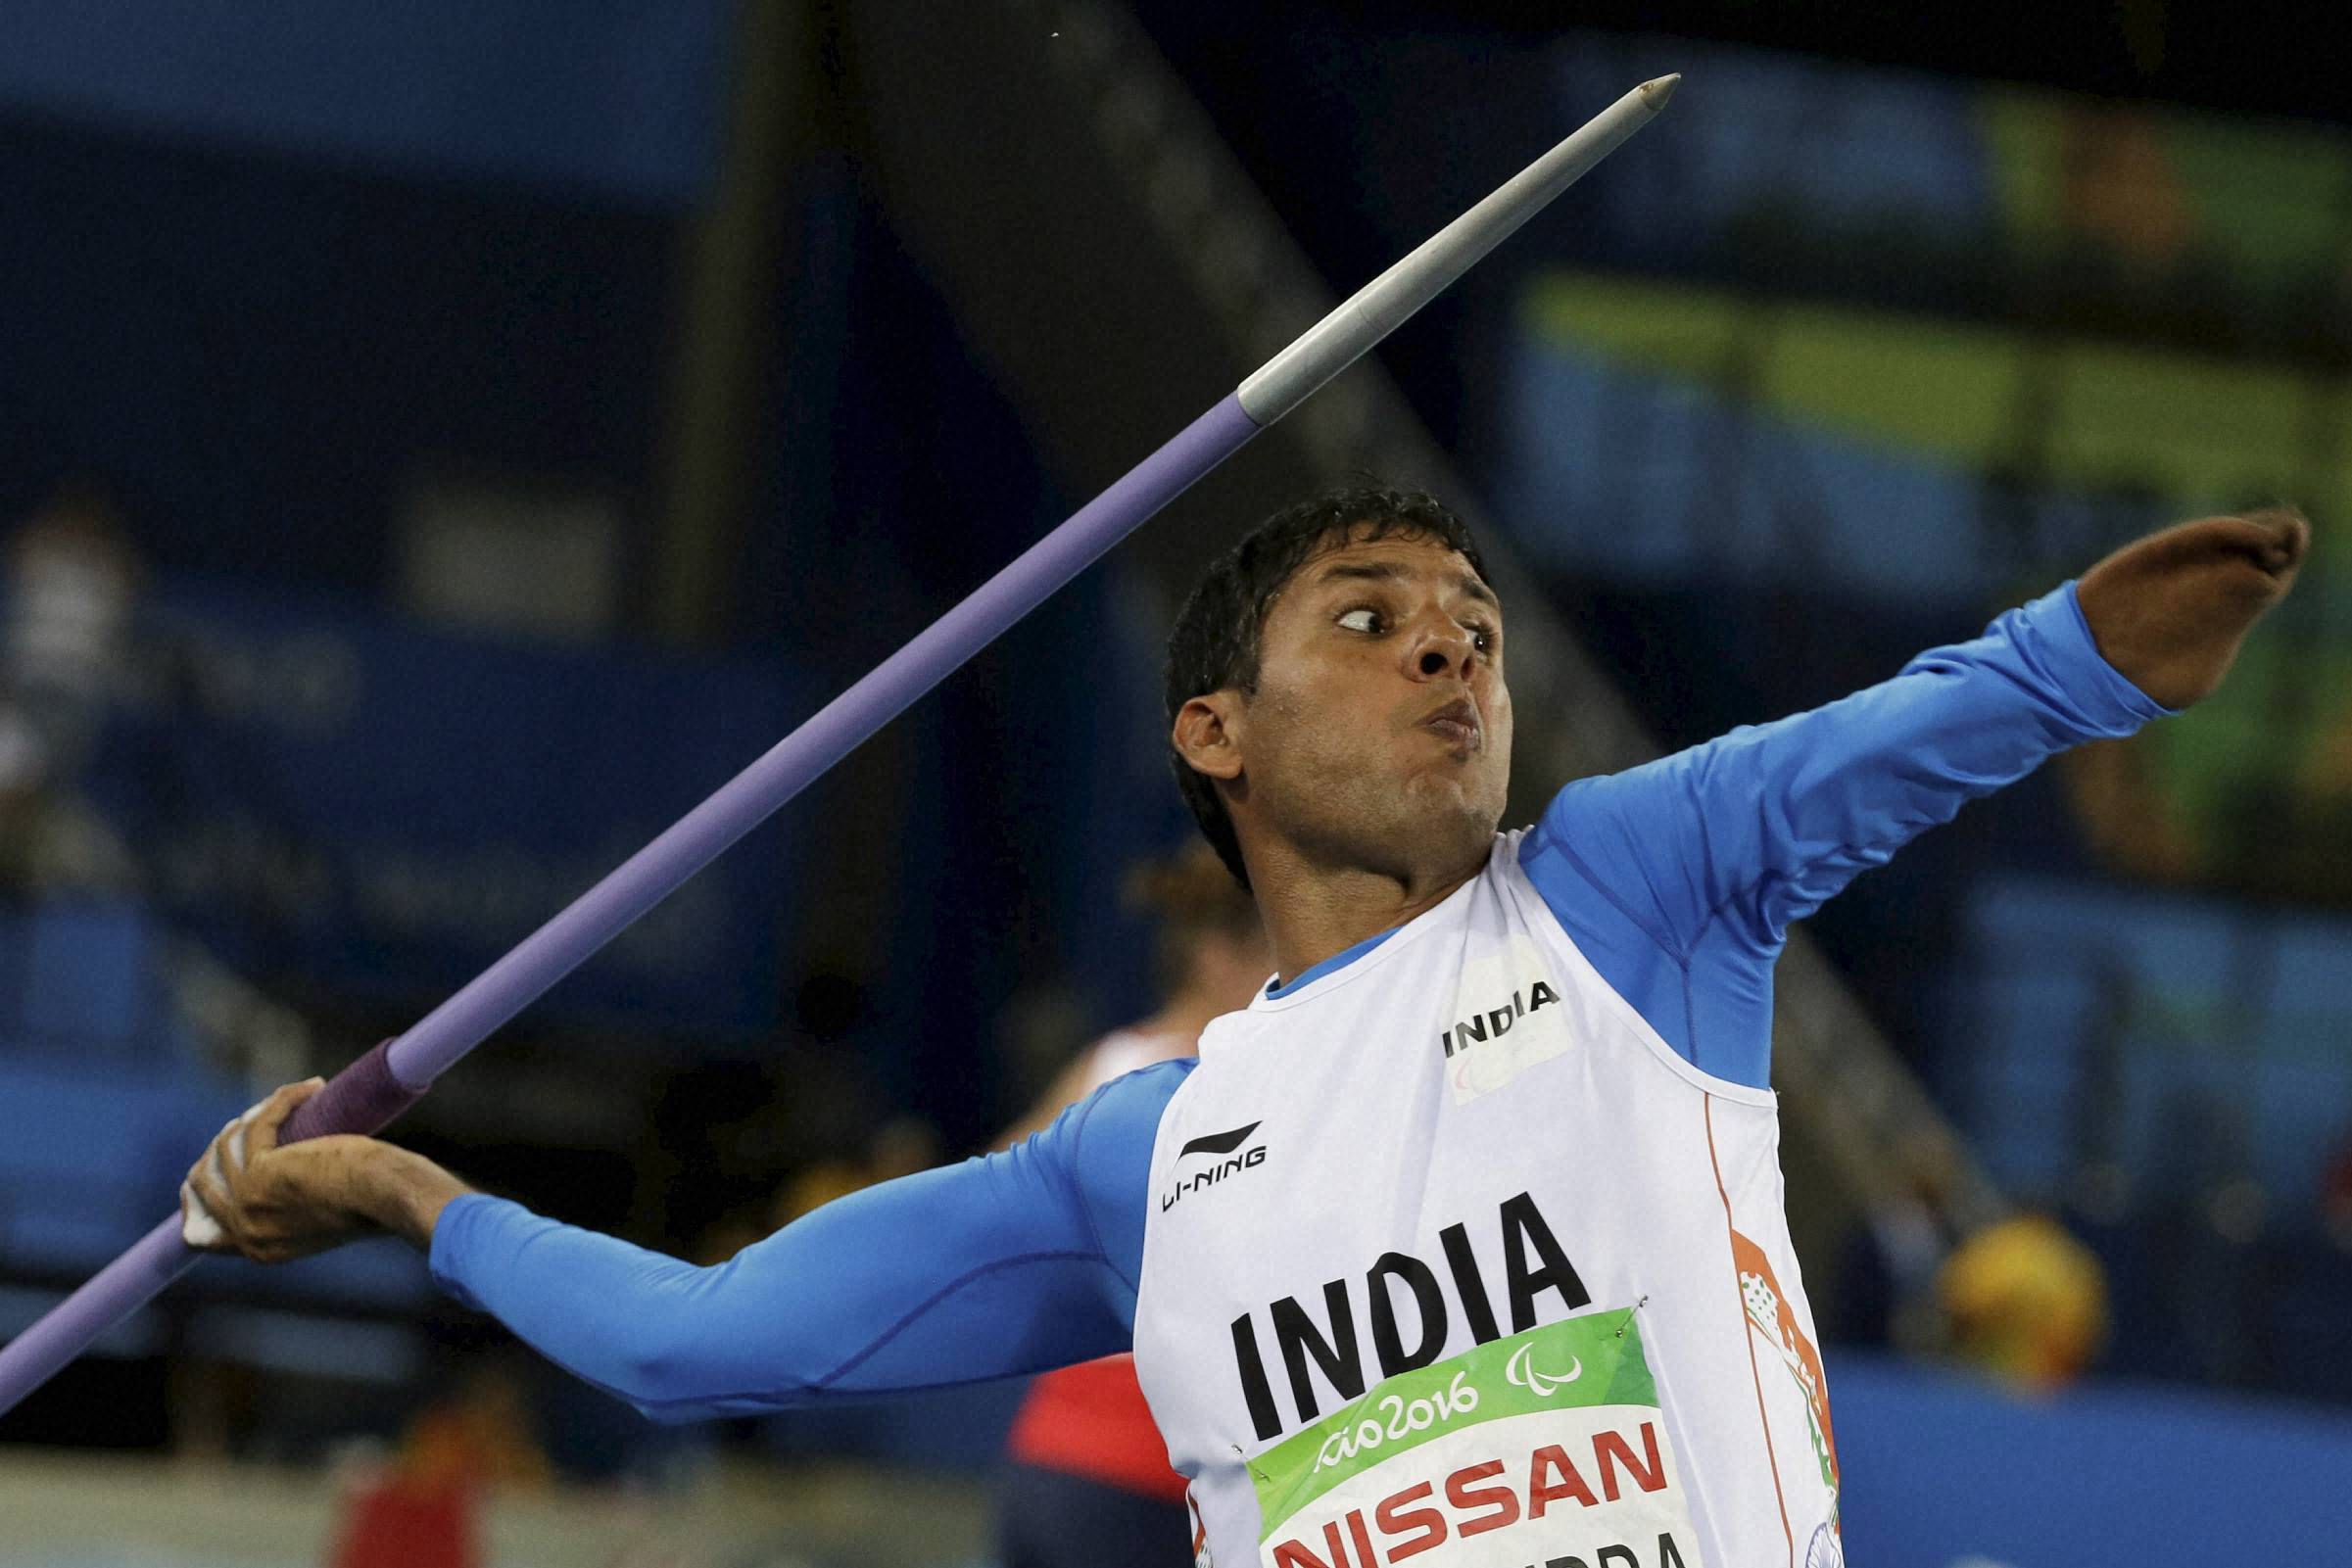 Devendra Jhajharia is eyeing his third paralympic medal. (Photo: AP)